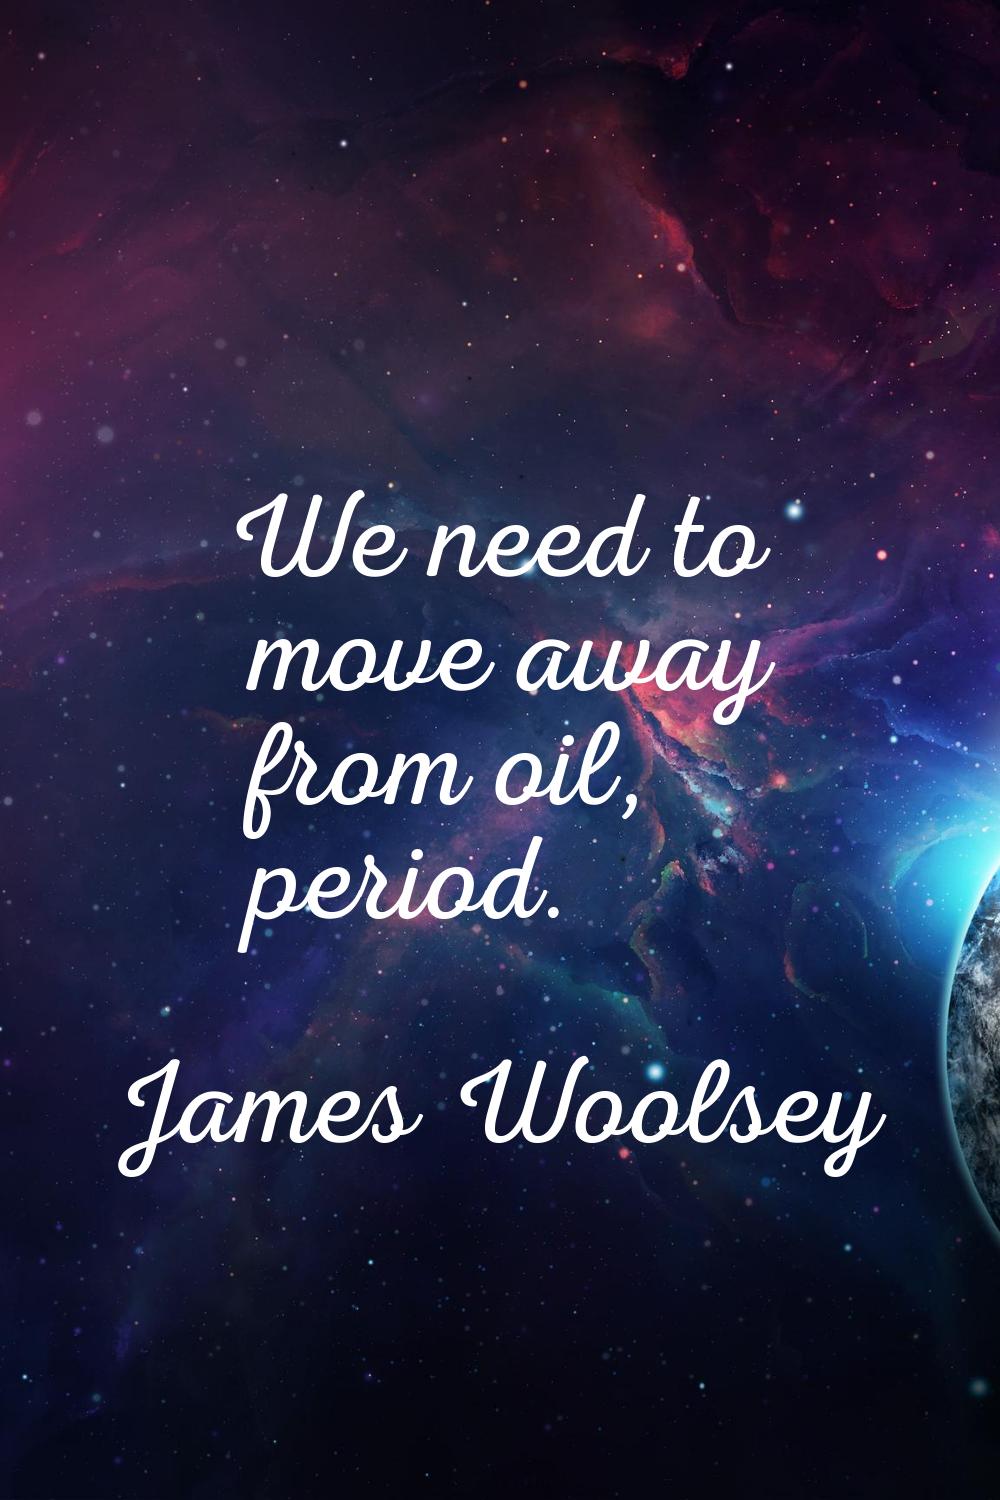 We need to move away from oil, period.